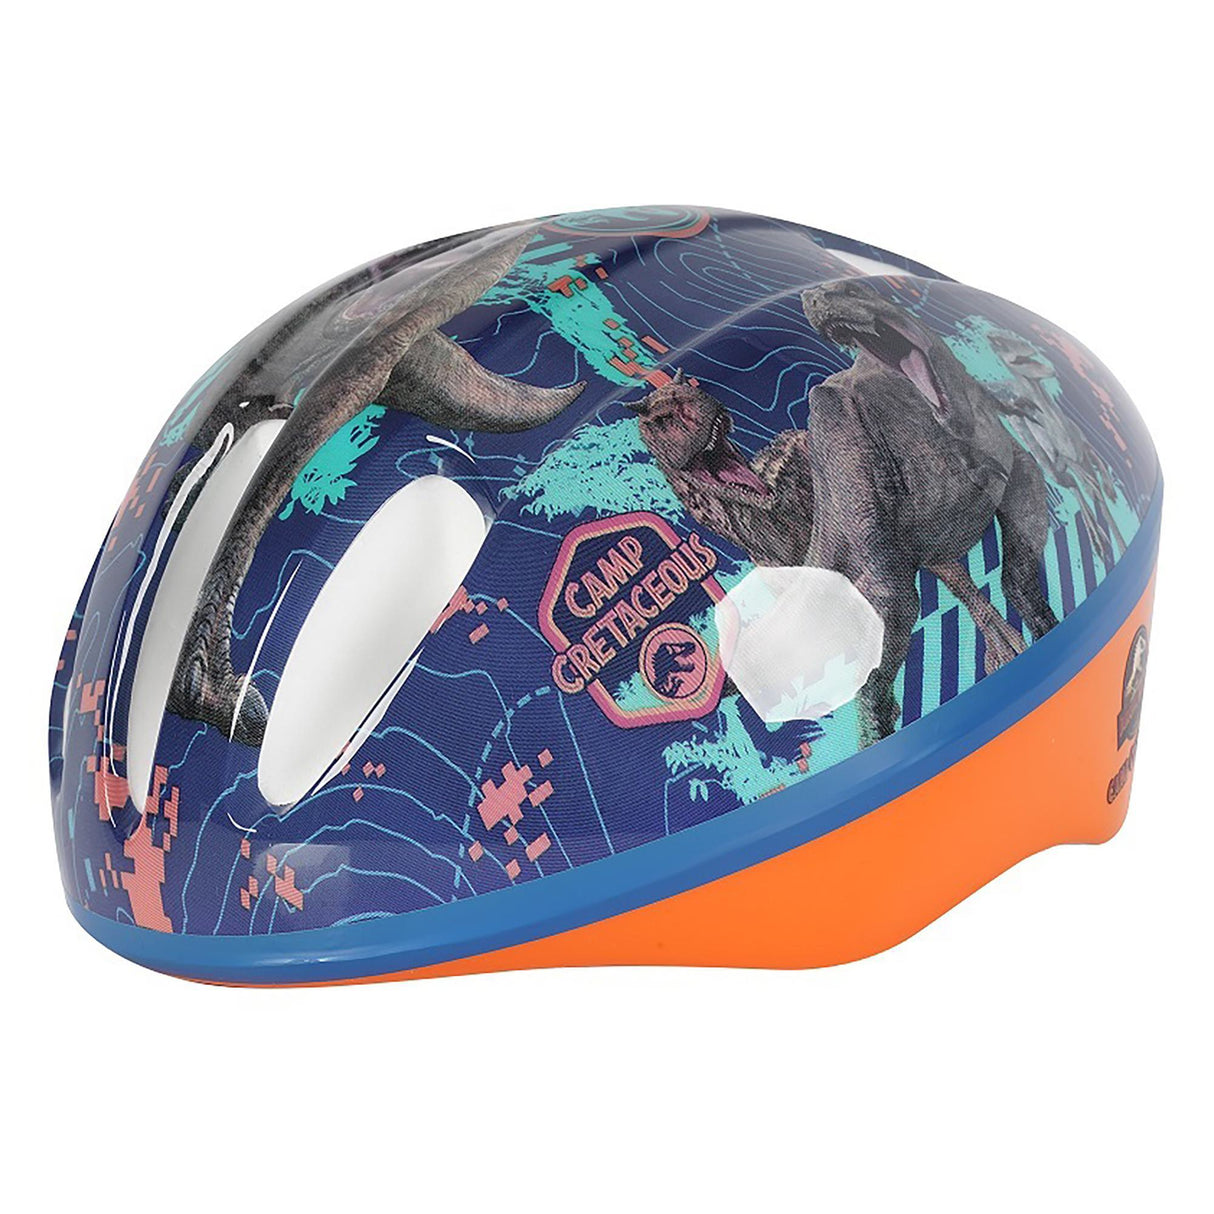 Jurassic World Camp Cretaceous Child Bicycle Safety Helmet